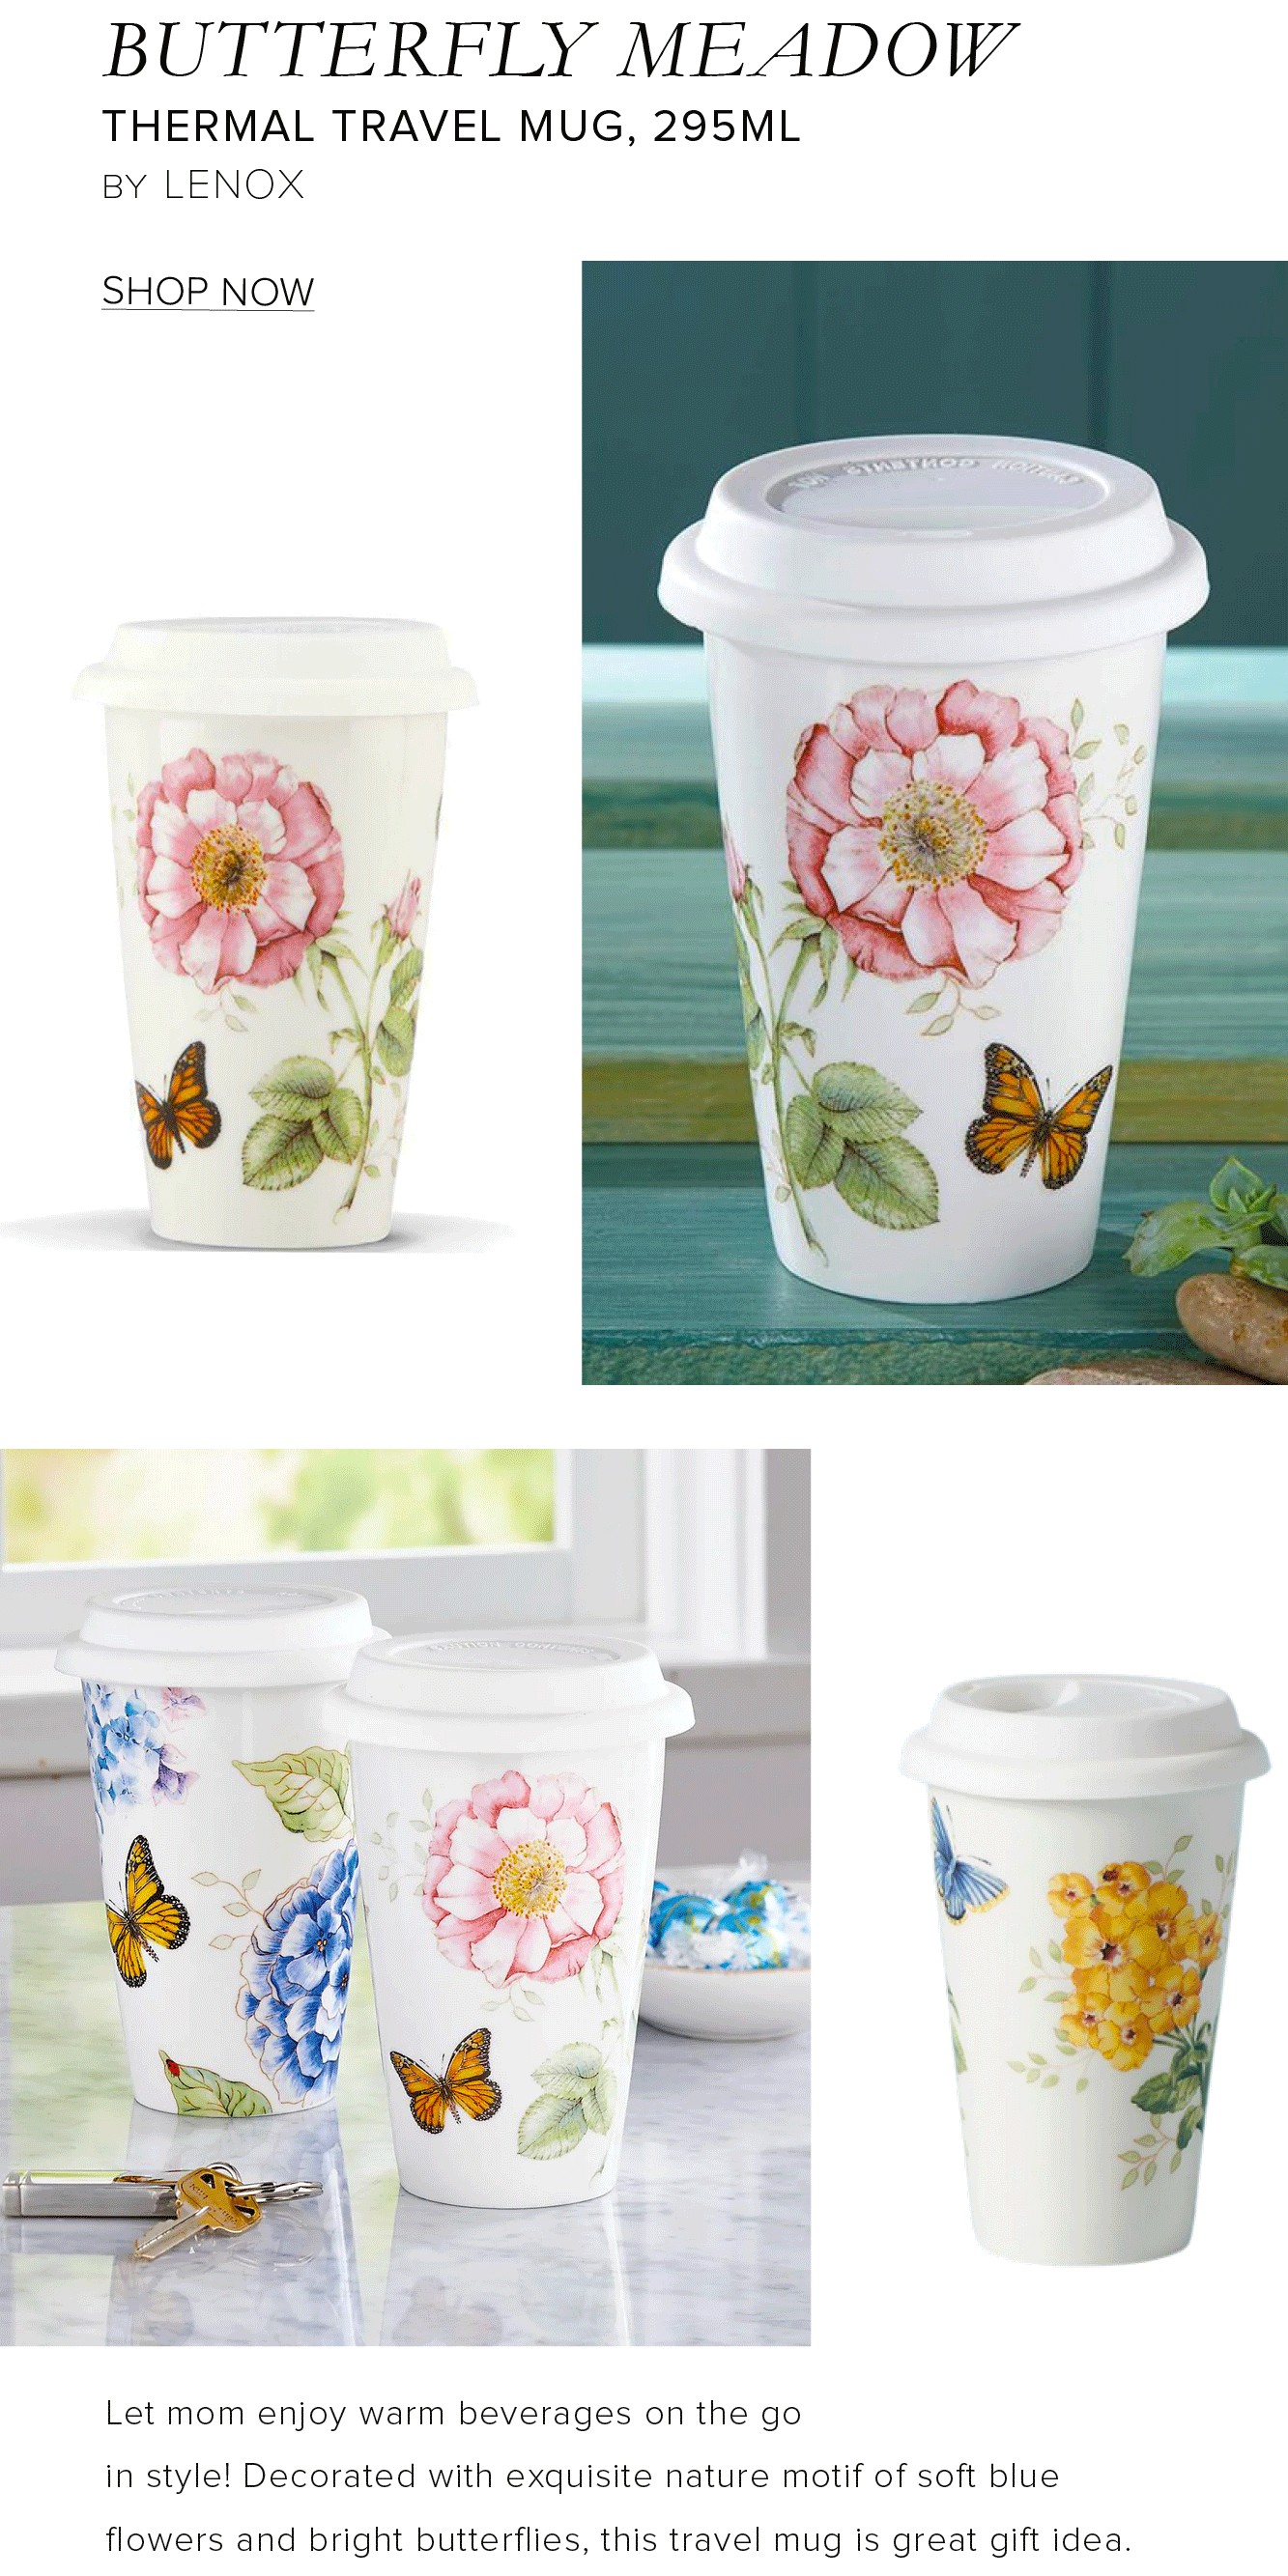 BUTTERFLY MEADOW THERMAL TRAVEL MUG, 295ML BY LENOX SHOP NOW Let mom enjoy warm beverages on the go in style! Decorated with exquisite nature motif of soft blue flowers and bright butterflies, this travel mug is great gift idea. 